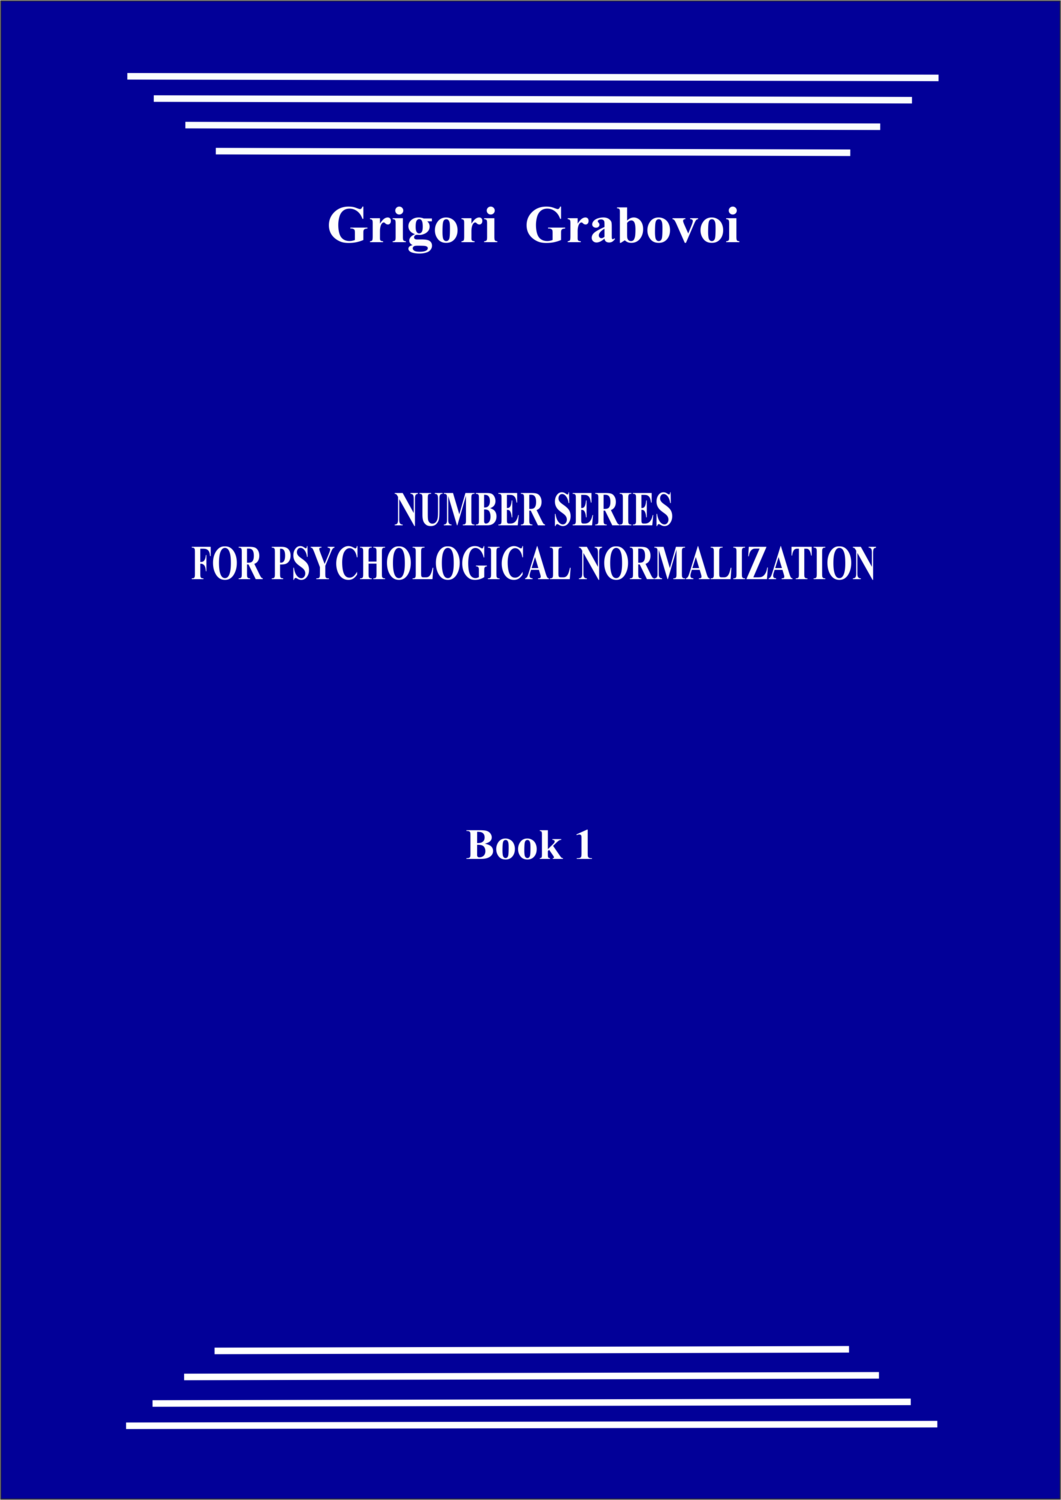 Number series for psychological normalization, book 1